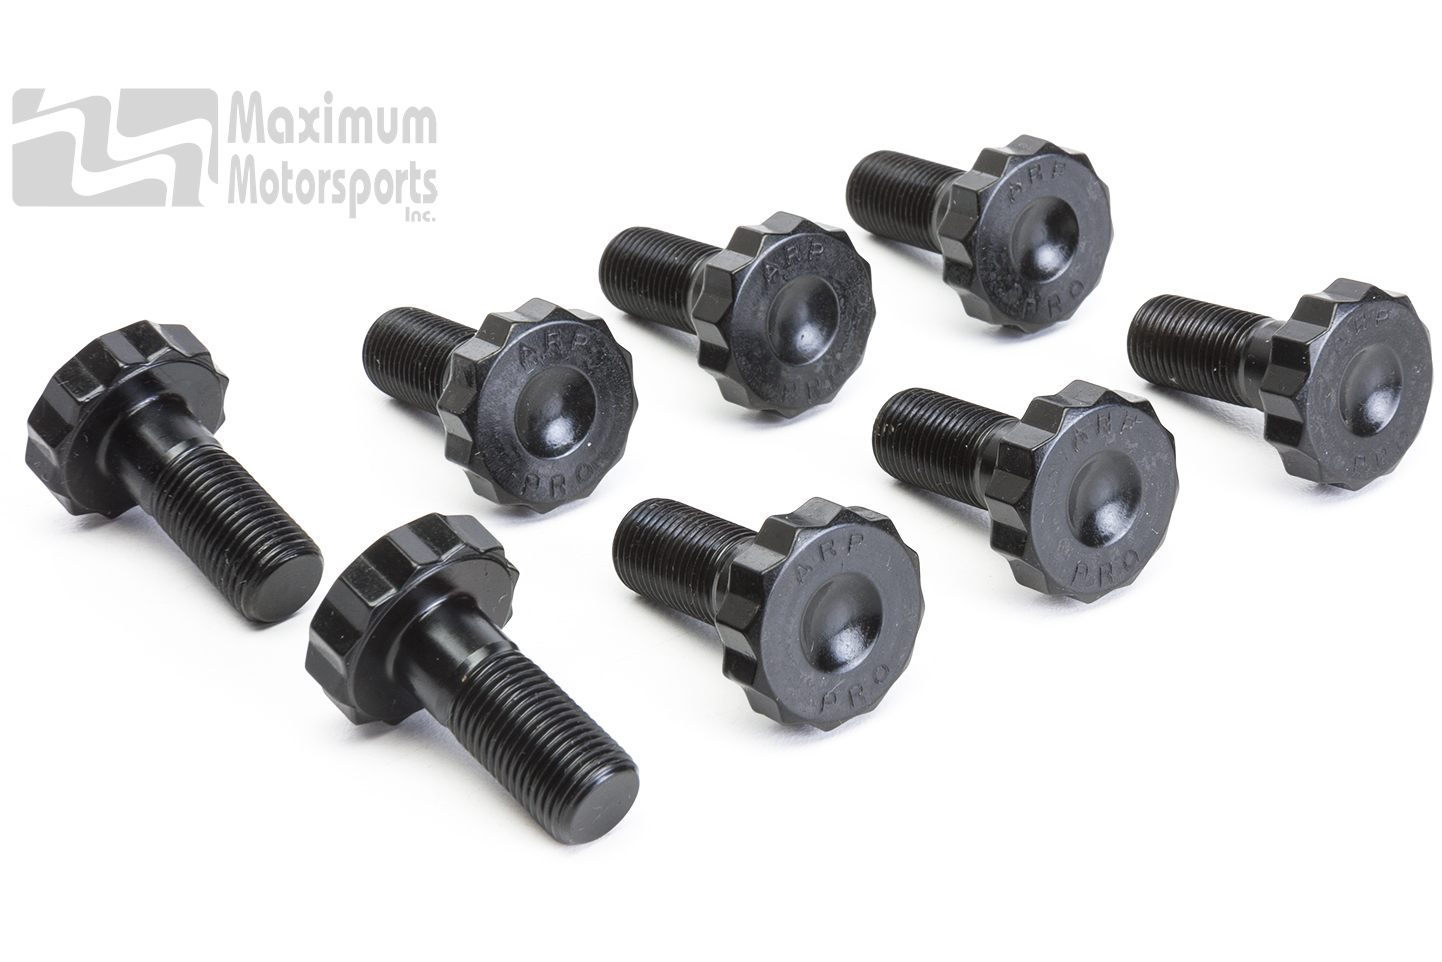 ARP flywheel bolts for 2011-2014 Mustang Coyote engine